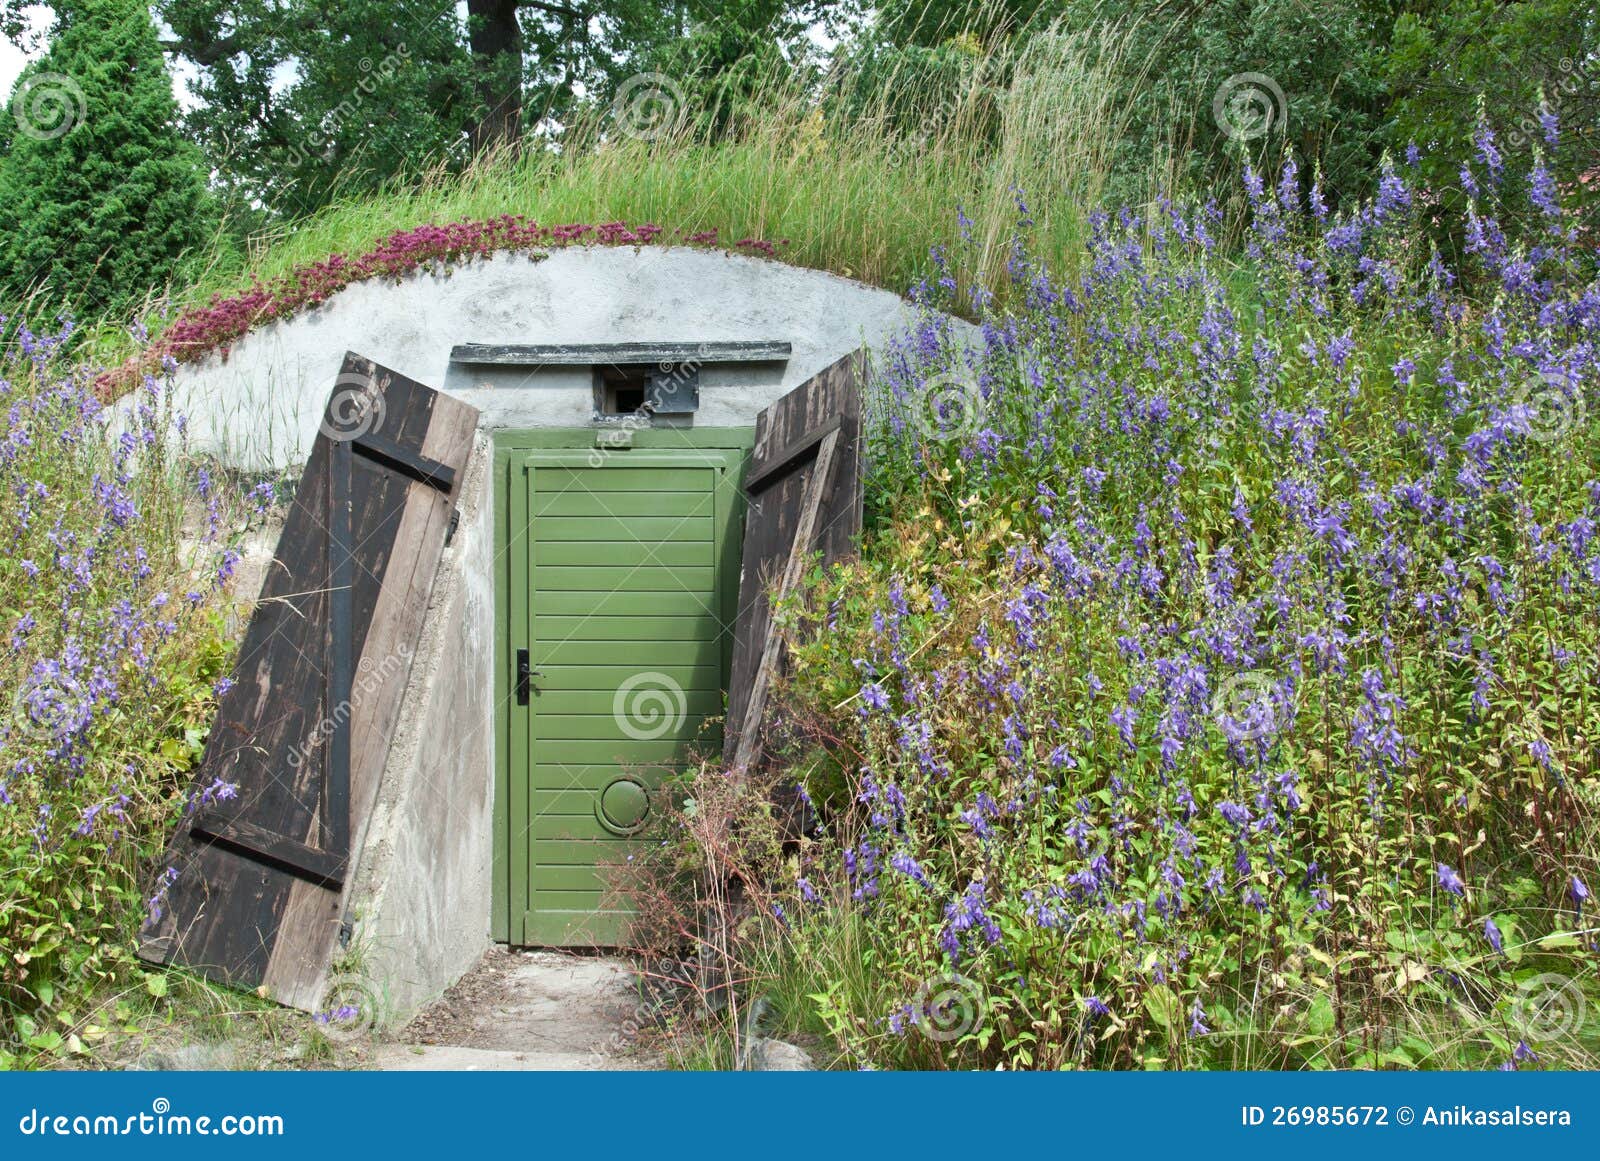 underground dwelling under a blooming hill